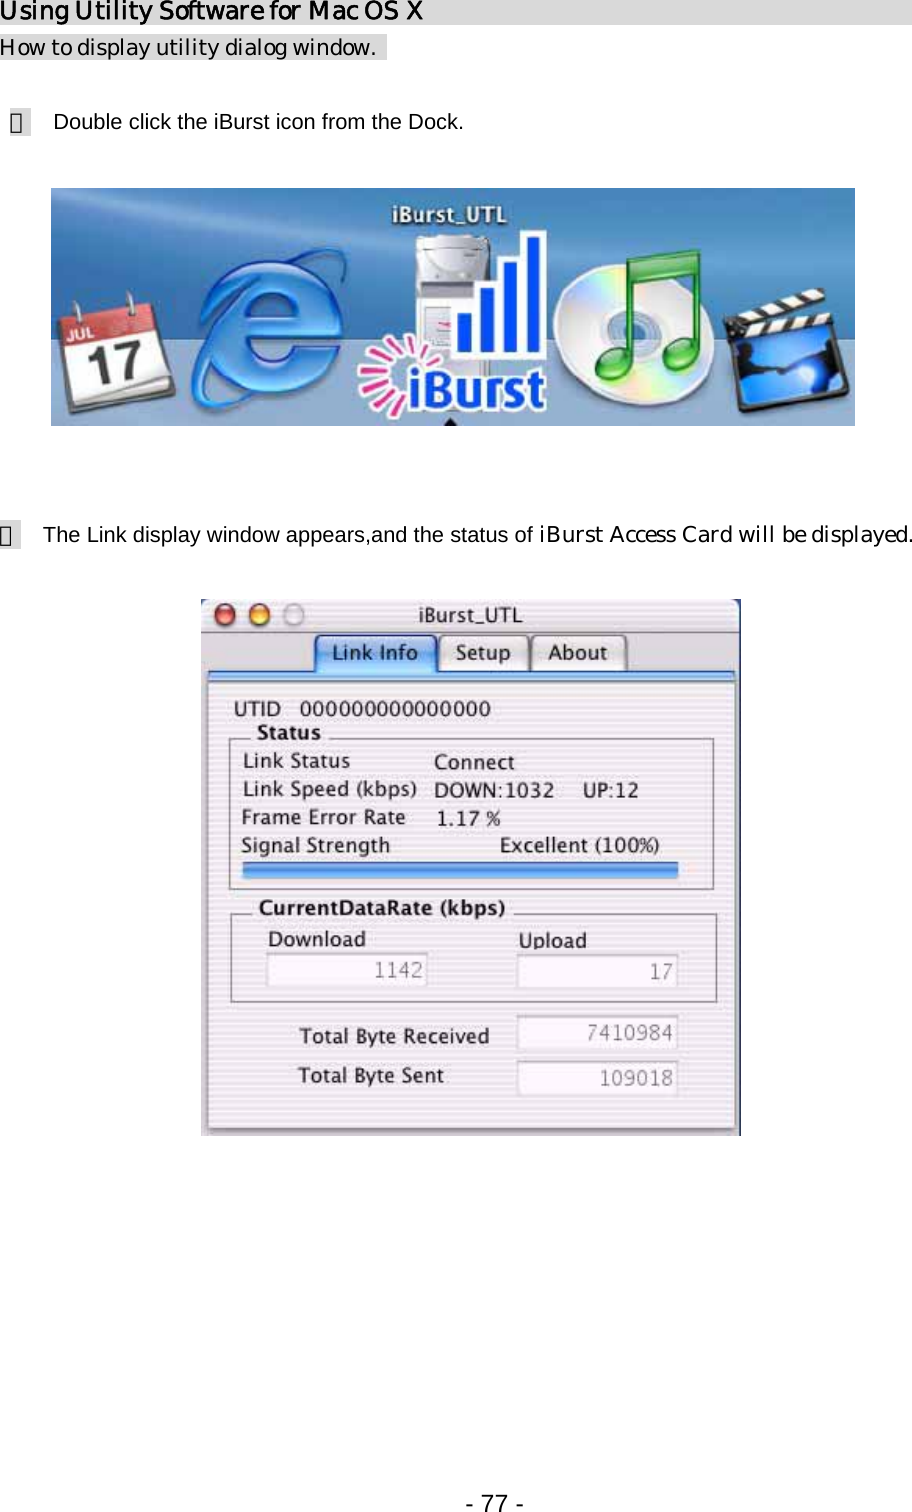 Using Utility Software for Mac OS X                                    How to display utility dialog window.     １  Double click the iBurst icon from the Dock.            ２  The Link display window appears,and the status of iBurst Access Card will be displayed.                         - 77 -  